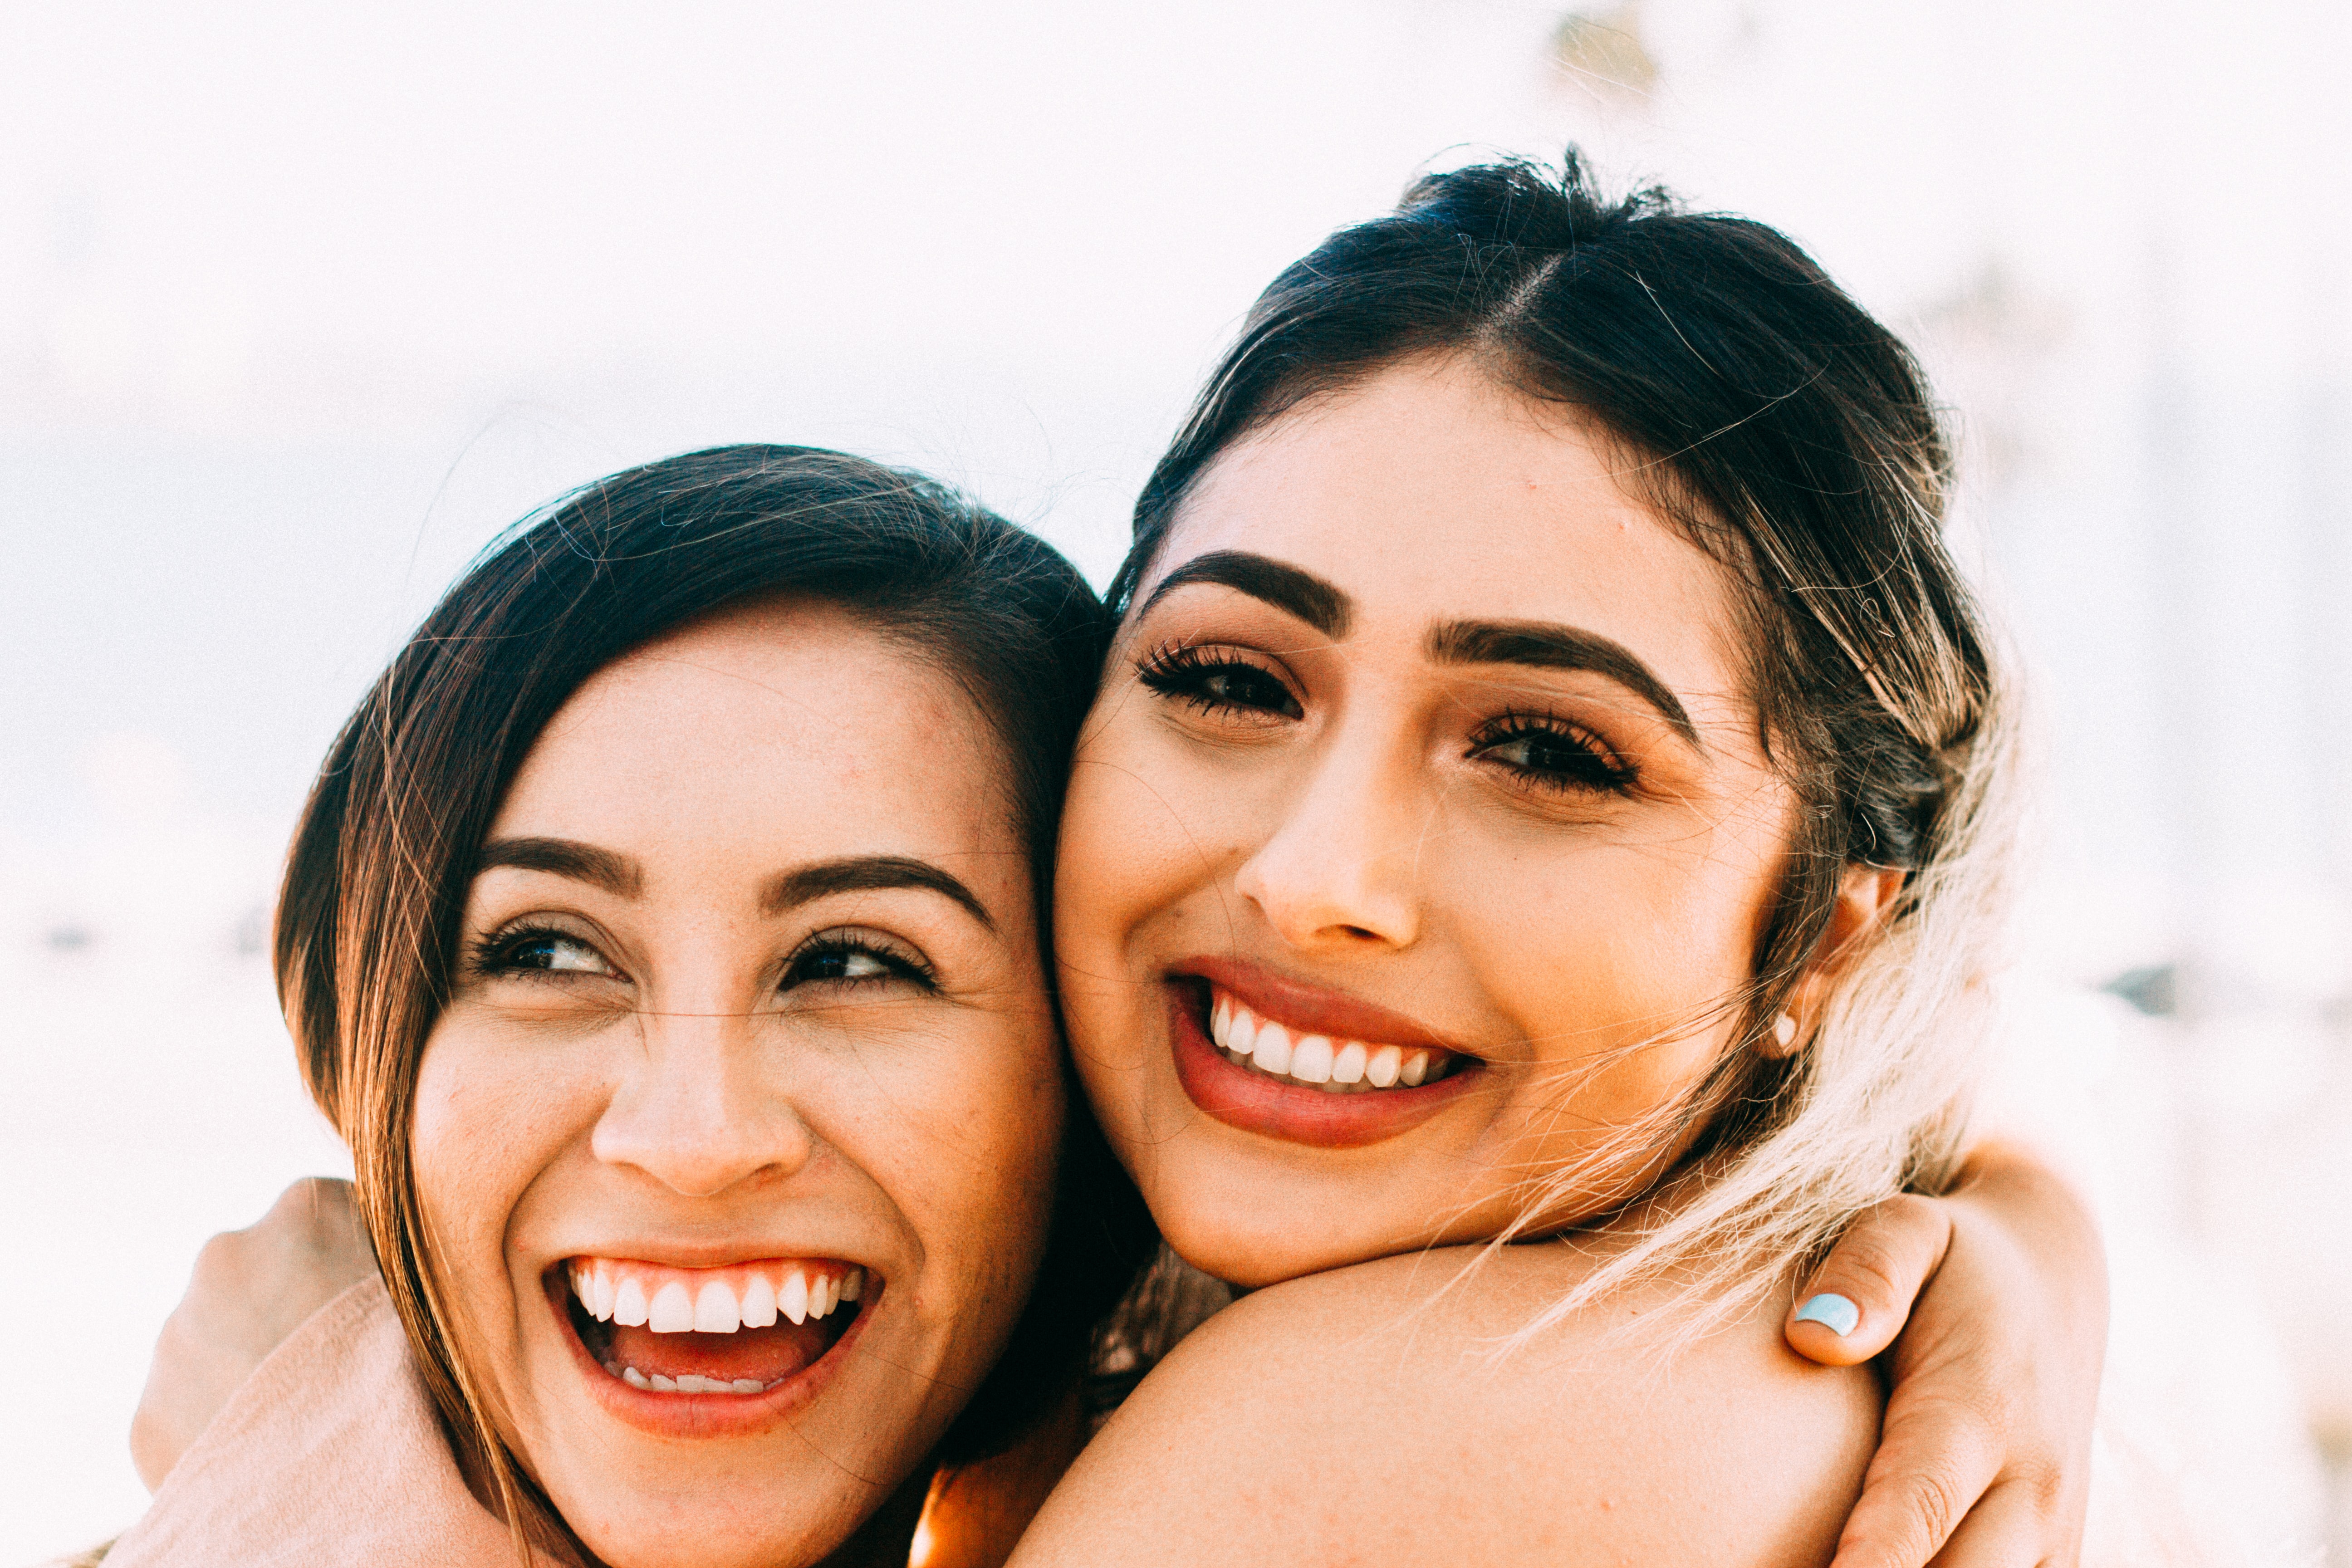 Two young latina women hugging and smiling looking at the camera